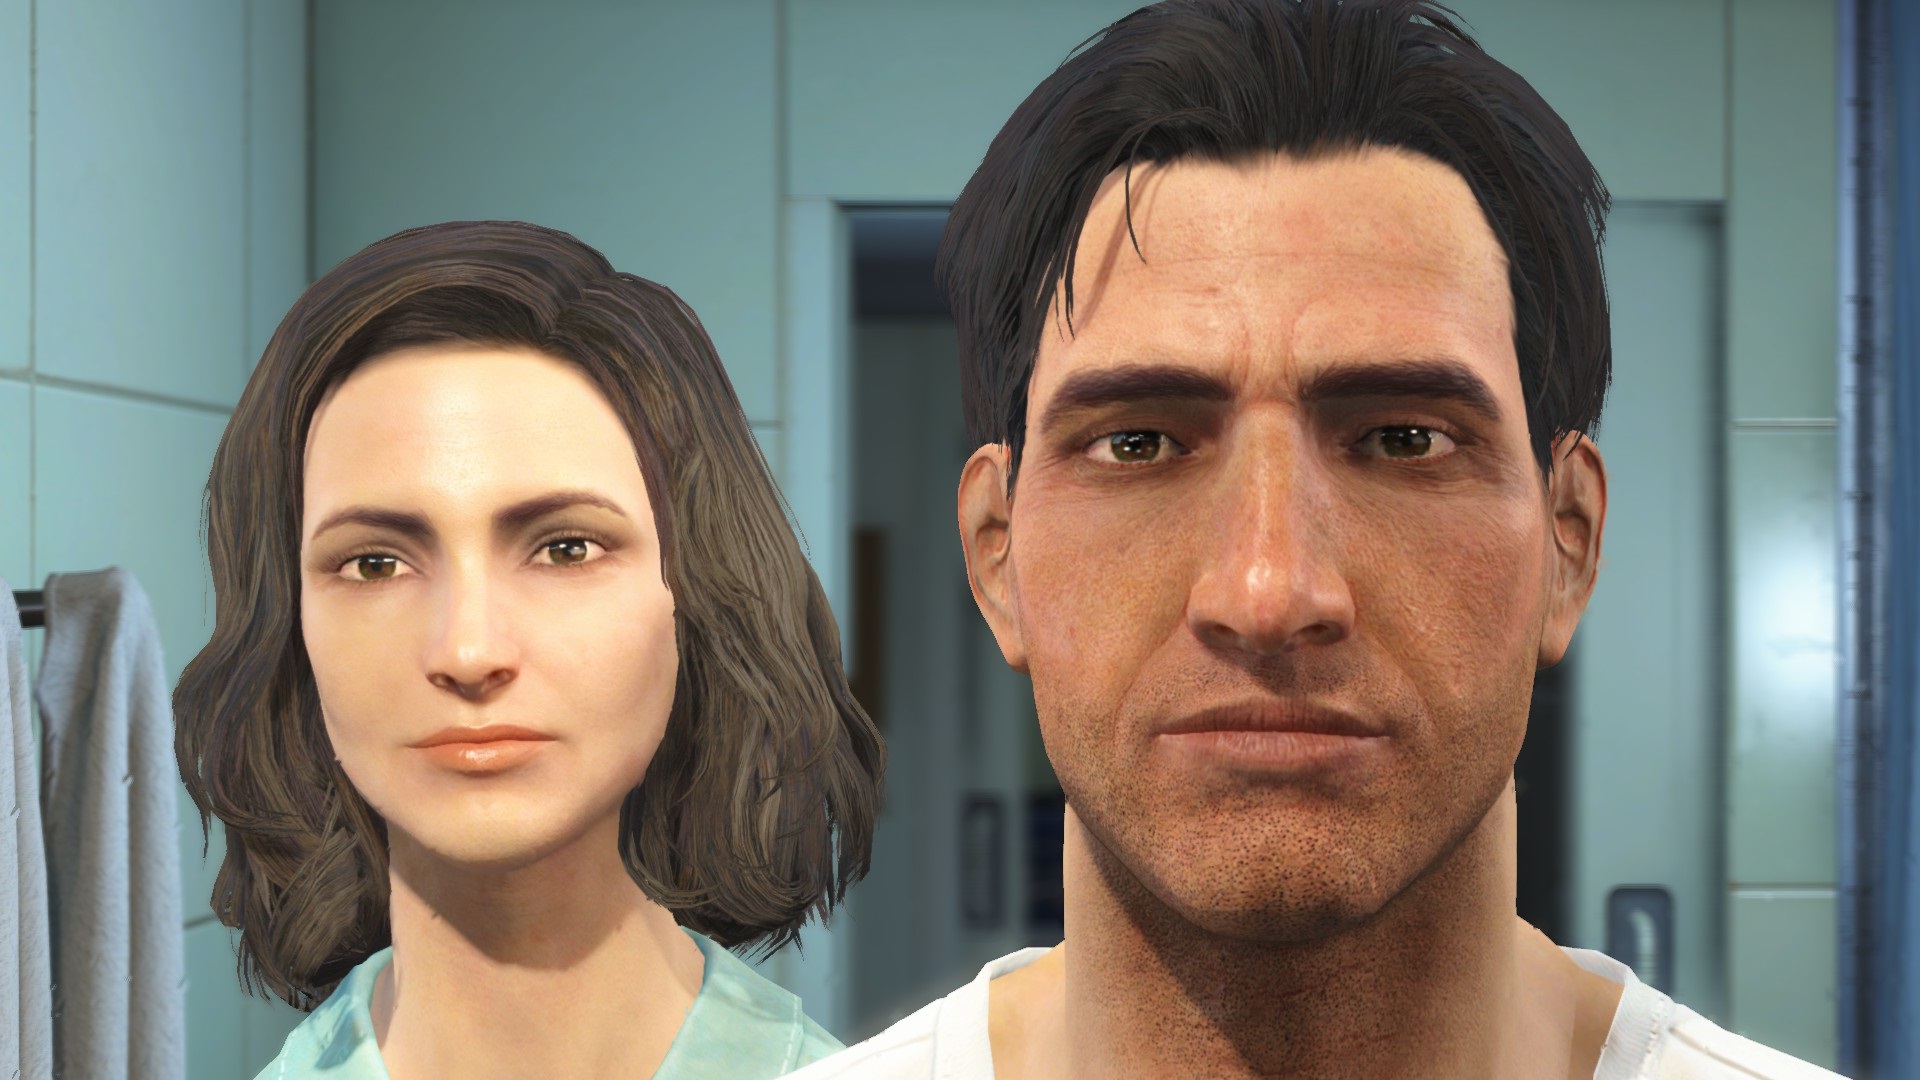  Fallout 4's 'next gen' update is over 14 gigs, breaks modded saves, and doesn't seem to change much at all 